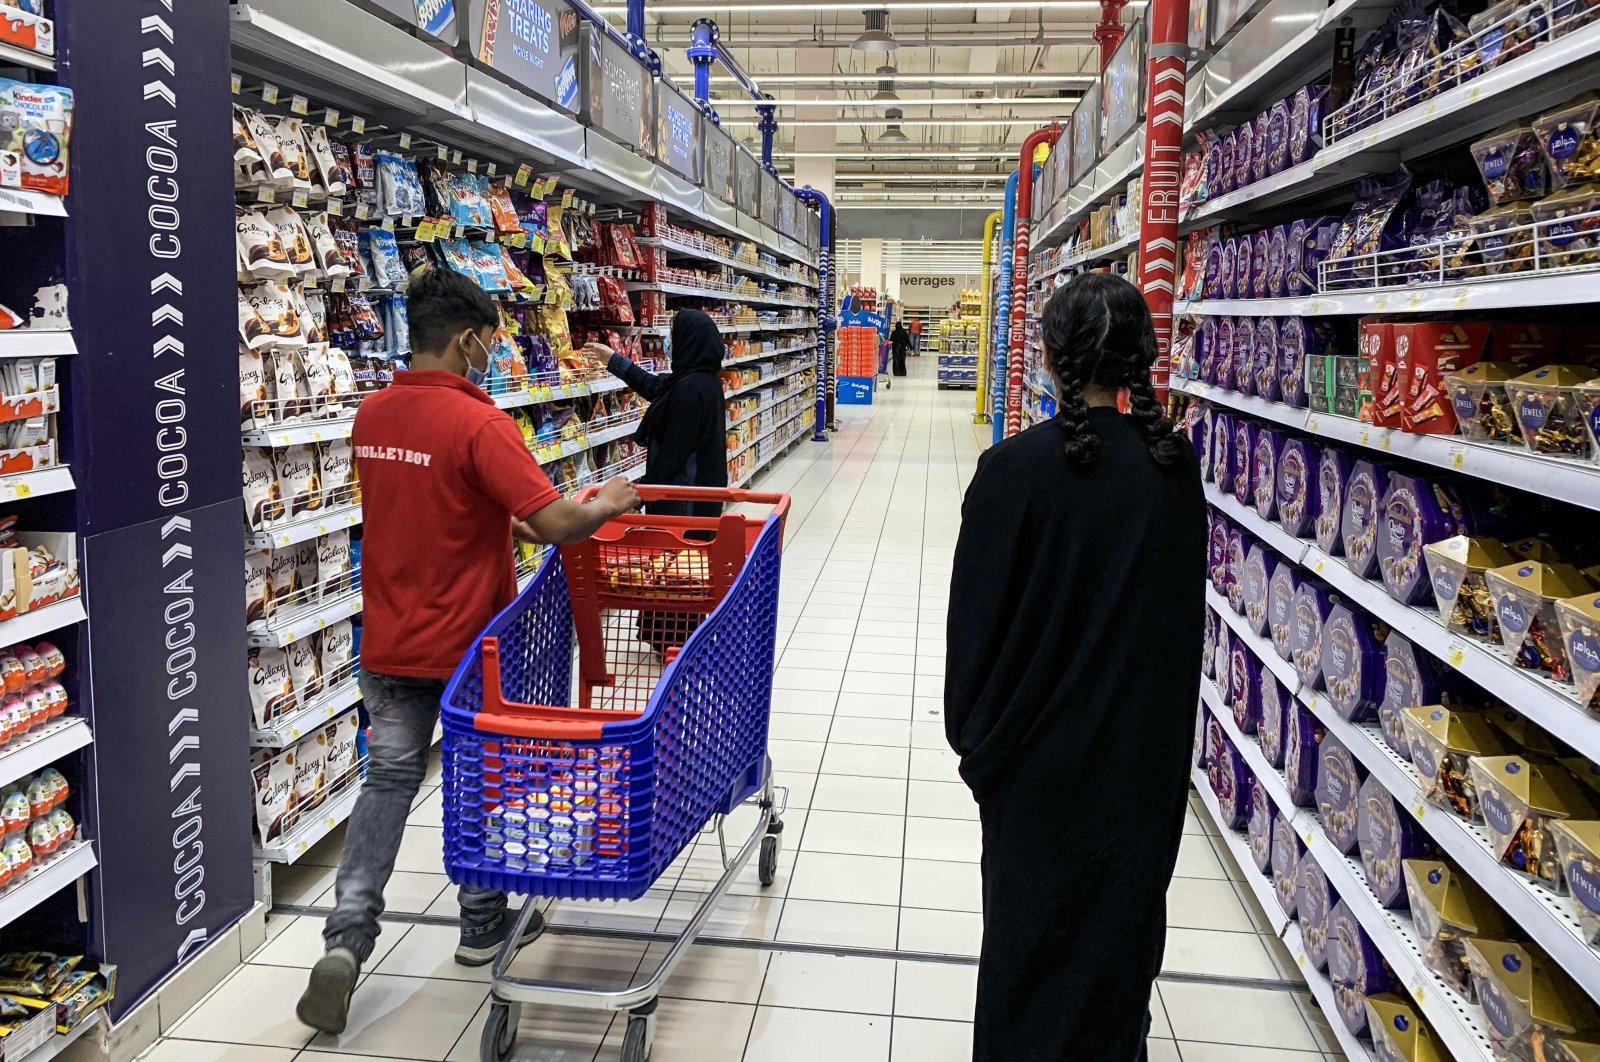 A woman shops for snacks at a supermarket in Saudi Arabia's capital Riyadh, Oct. 18, 2020. (AFP Photo)